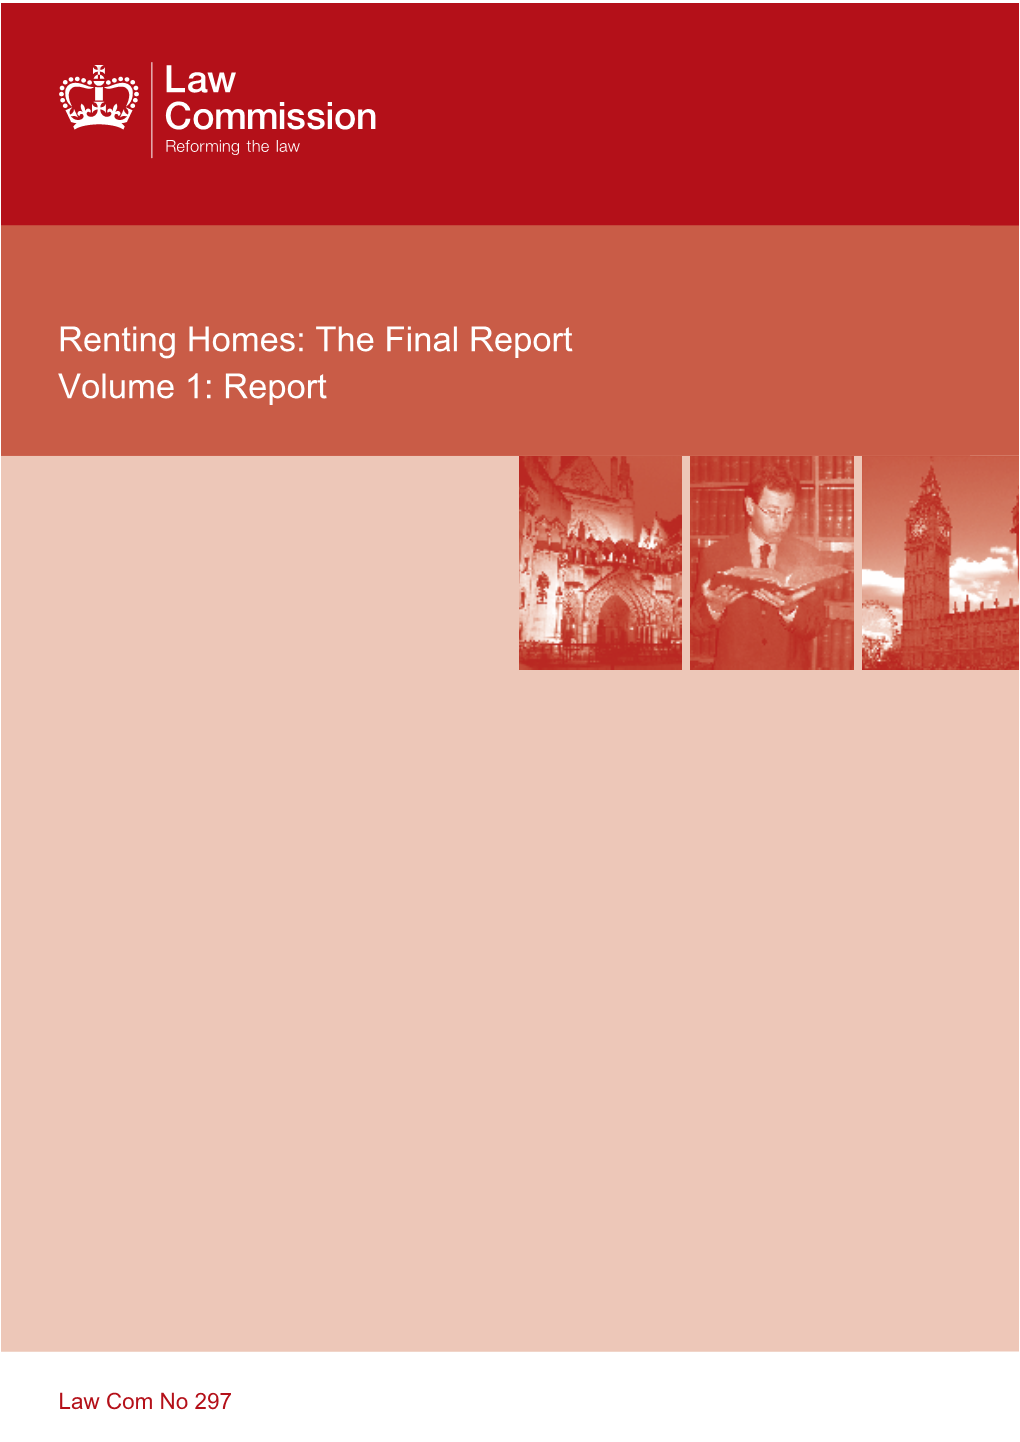 Renting Homes: the Final Report Volume 1: Report